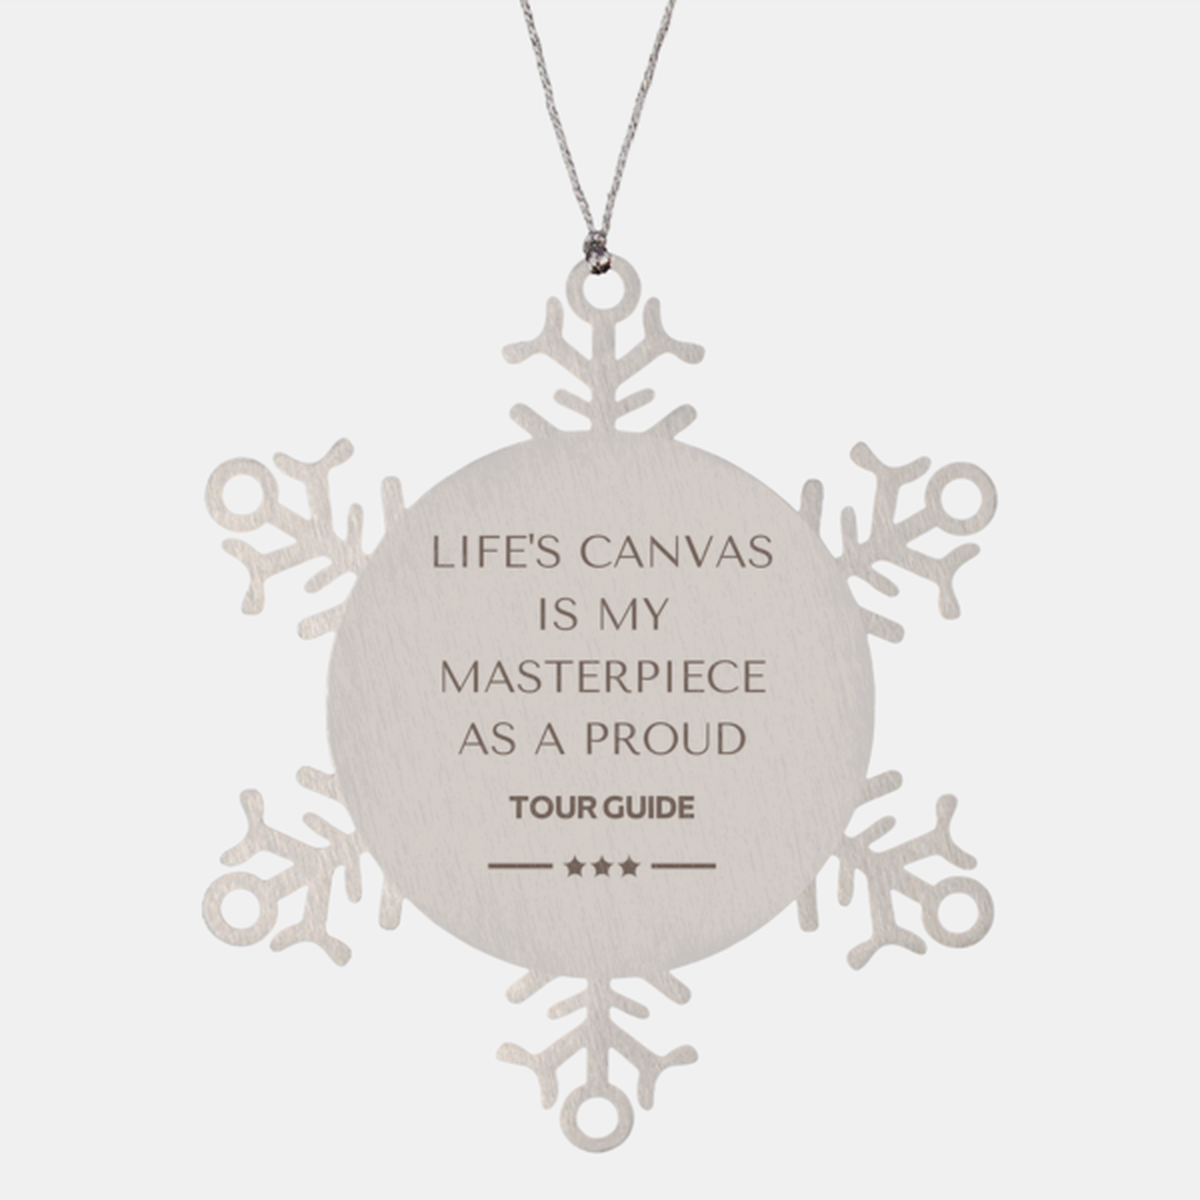 Proud Tour Guide Gifts, Life's canvas is my masterpiece, Epic Birthday Christmas Unique Snowflake Ornament For Tour Guide, Coworkers, Men, Women, Friends